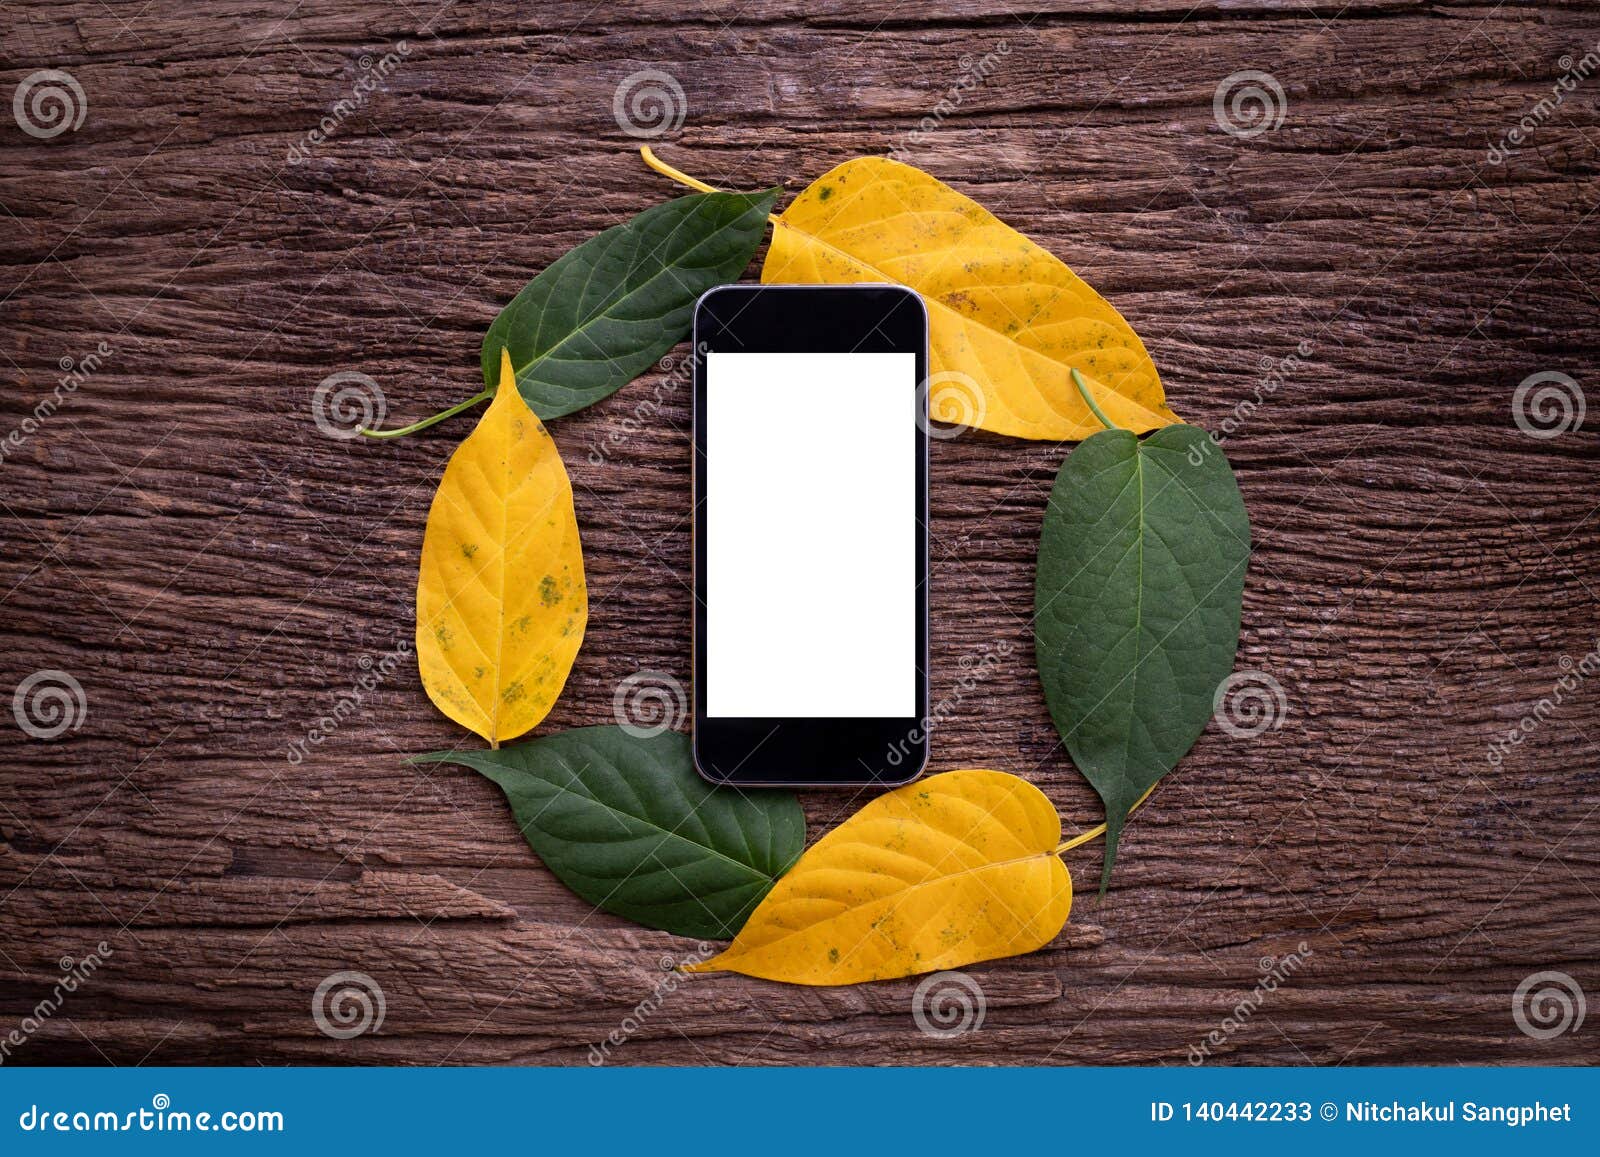 Blank Screen on on Smartphone, Mobile, Cell Phone and Leaf Cycle Frame  Background on Wood Table Stock Image - Image of technology, screen:  140442233